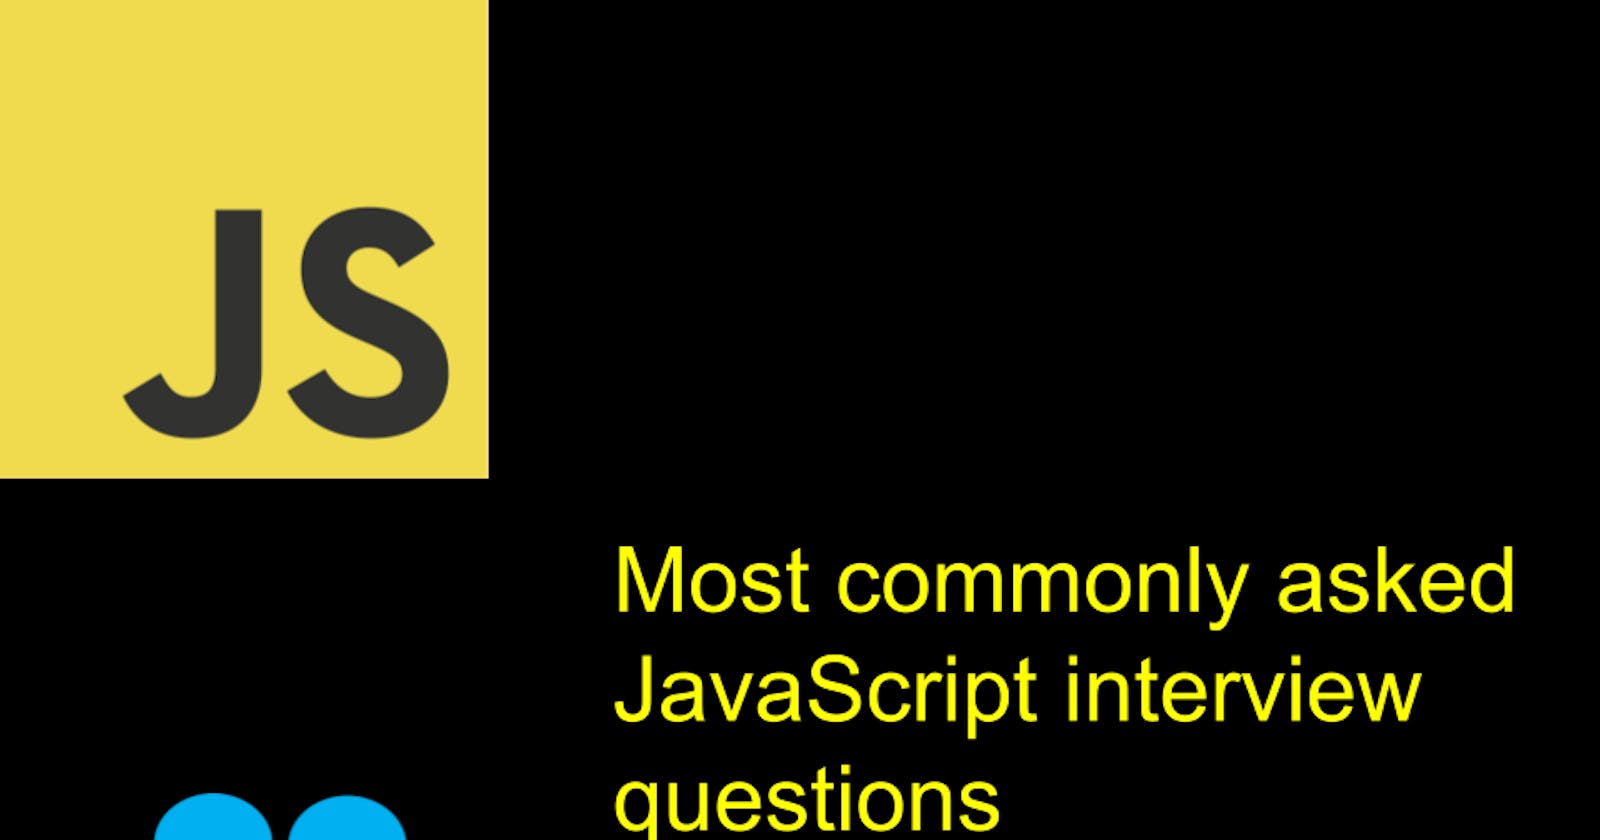 Most commonly asked JavaScript interview questions